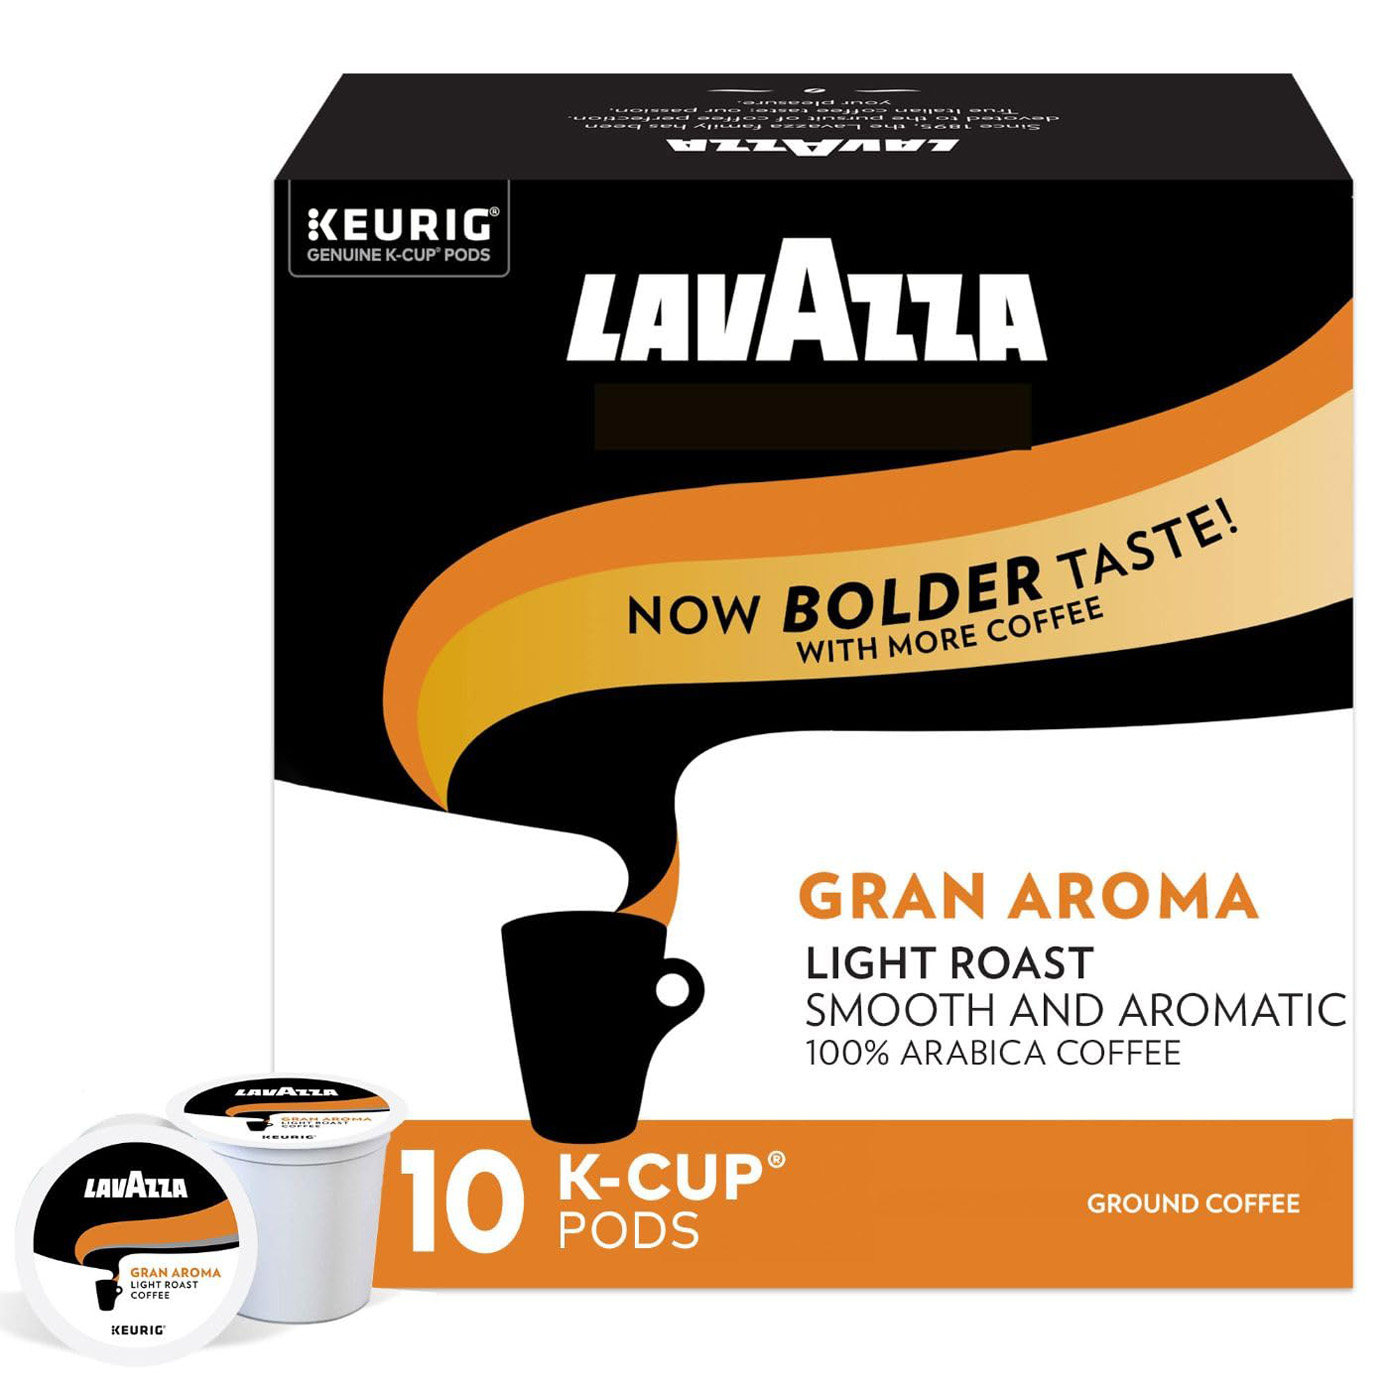 Lavazza Gran Aroma Single-Serve Coffee K-Cup Pods for Keurig Brewer, Light Roast, 10-Count Boxes (Pack of 6)